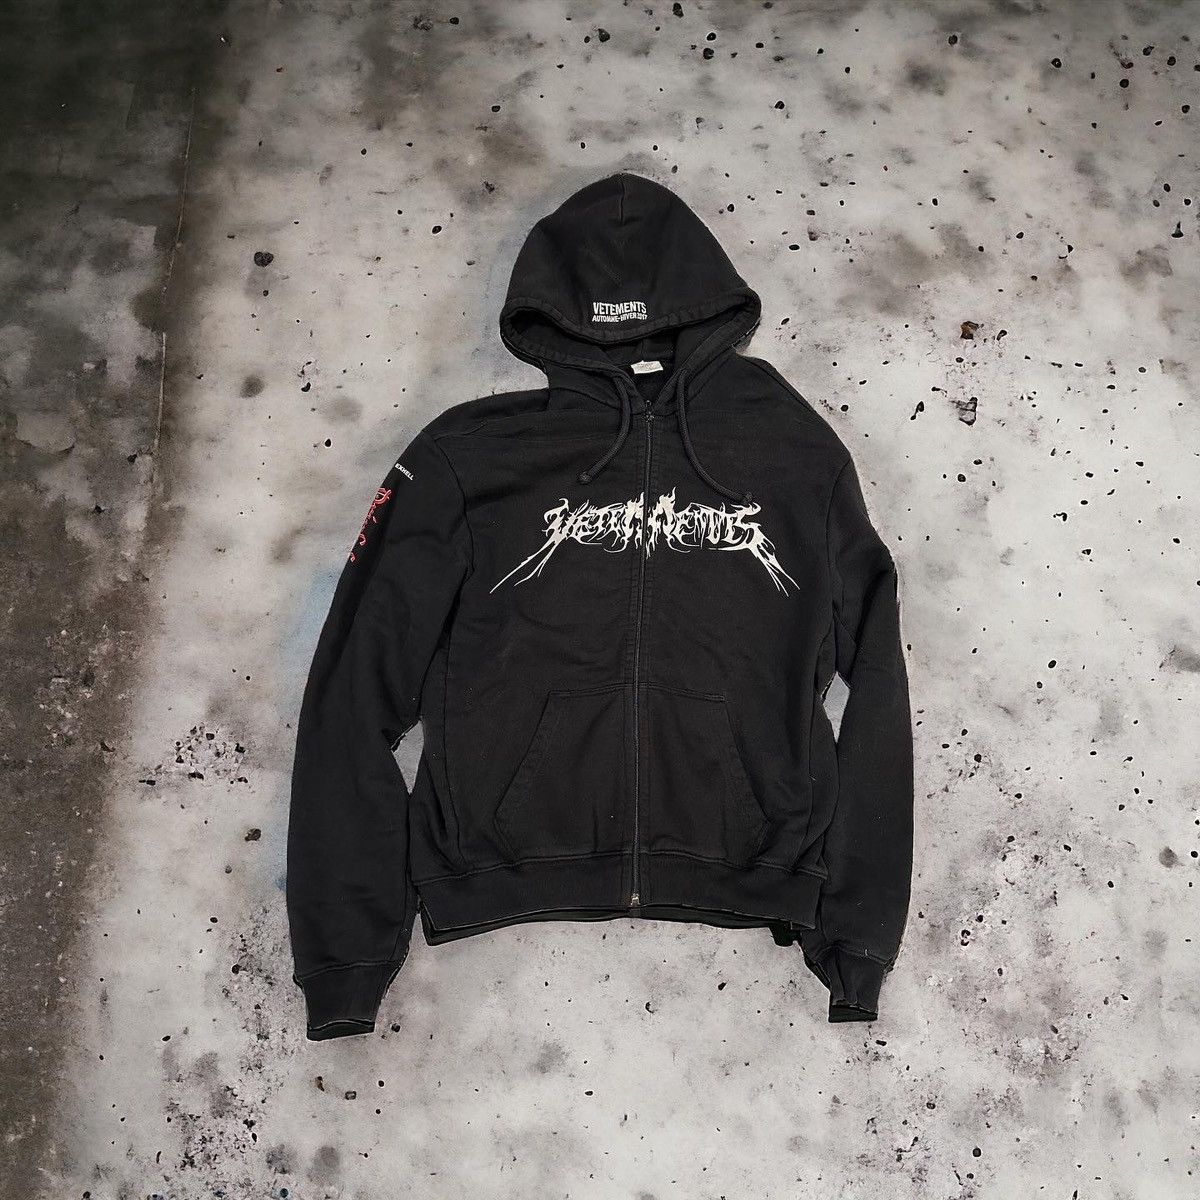 Vetements Total Fucking Darkness | Grailed